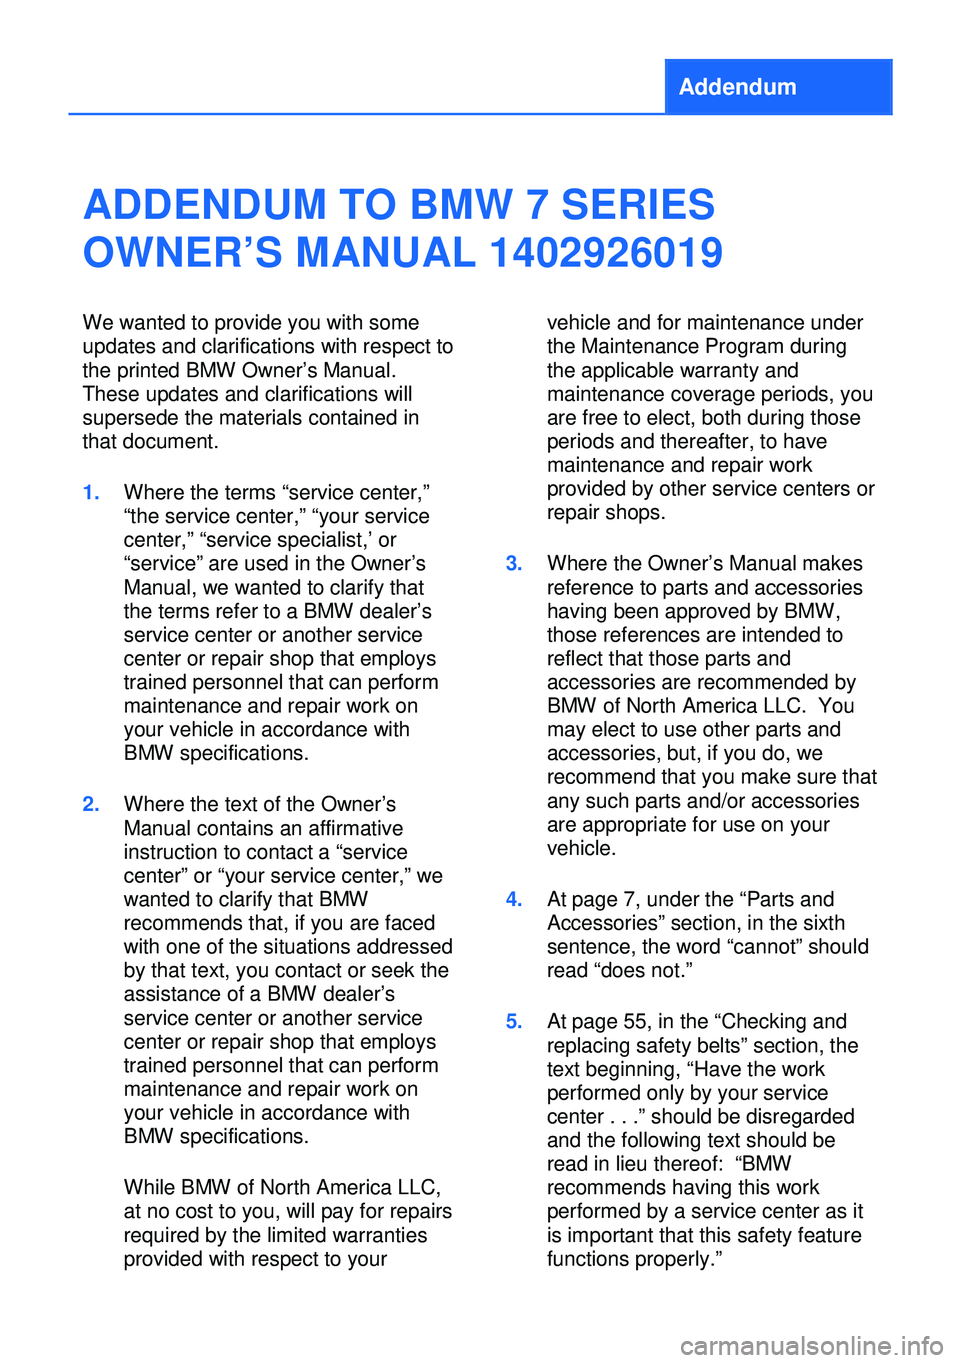 BMW 7 SERIES LONG 2013 F02 Owners Manual Addendum
ADDENDUM TO BMW 7 SERIES
OWNER’S MANUAL 1402926019
We wanted to provide you with some
updates and clarifications with respect to
the printed BMW Owner’s Manual.
These updates and clarific